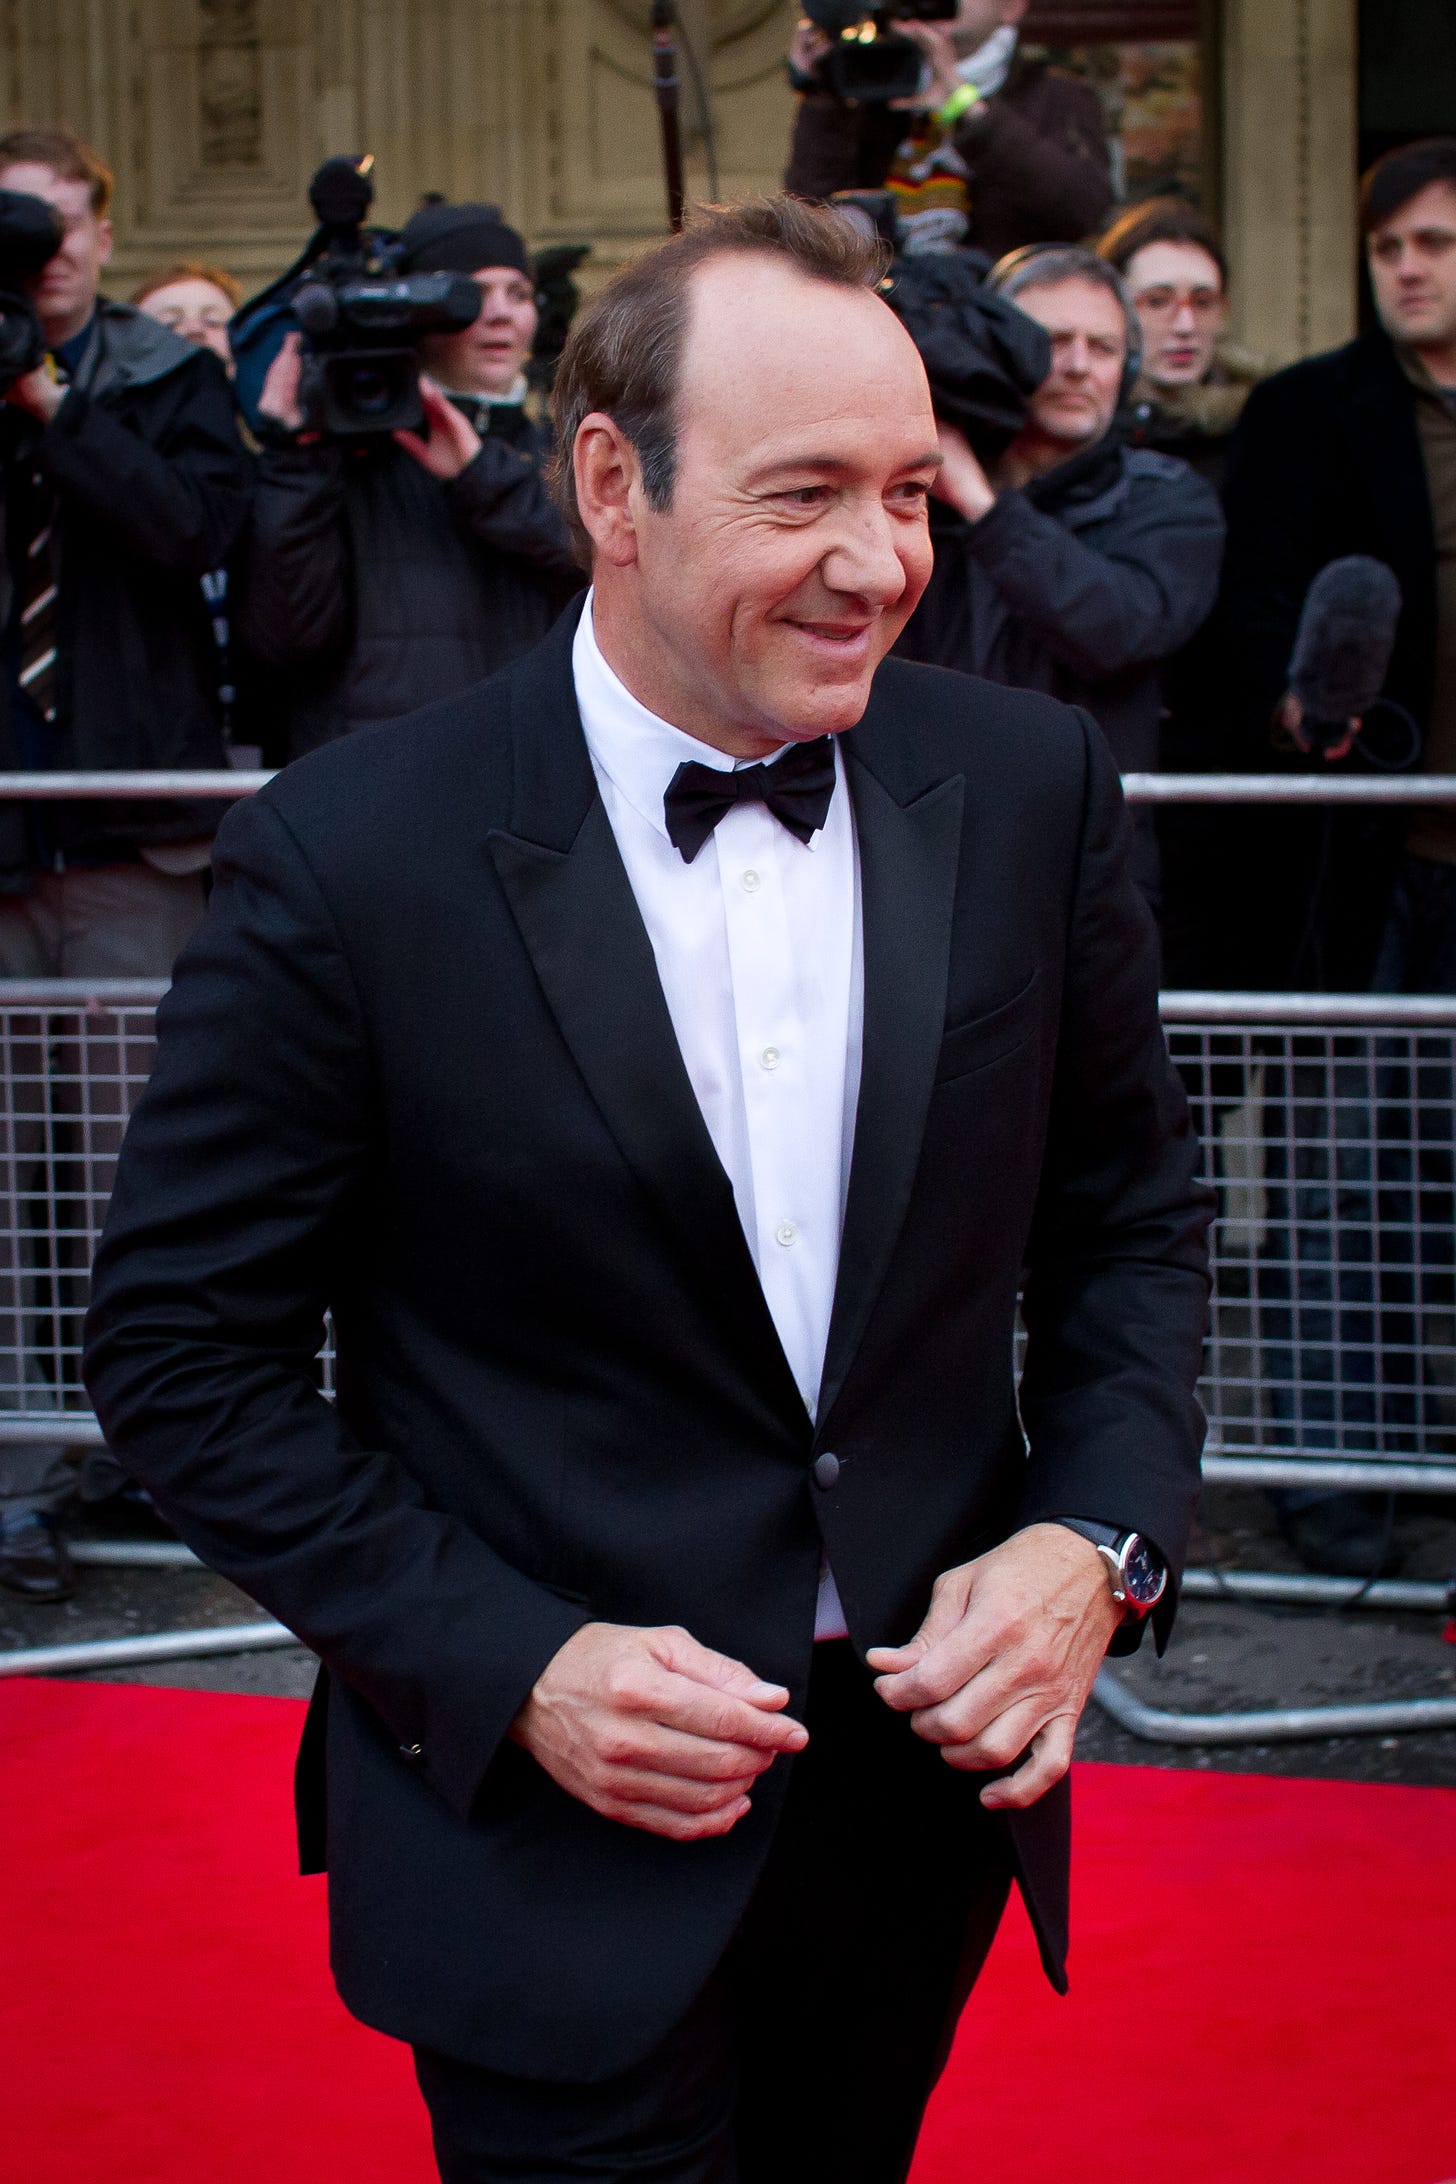 File:Kevin Spacey arriving at the Royal Albert Hall.jpg - Wikimedia Commons